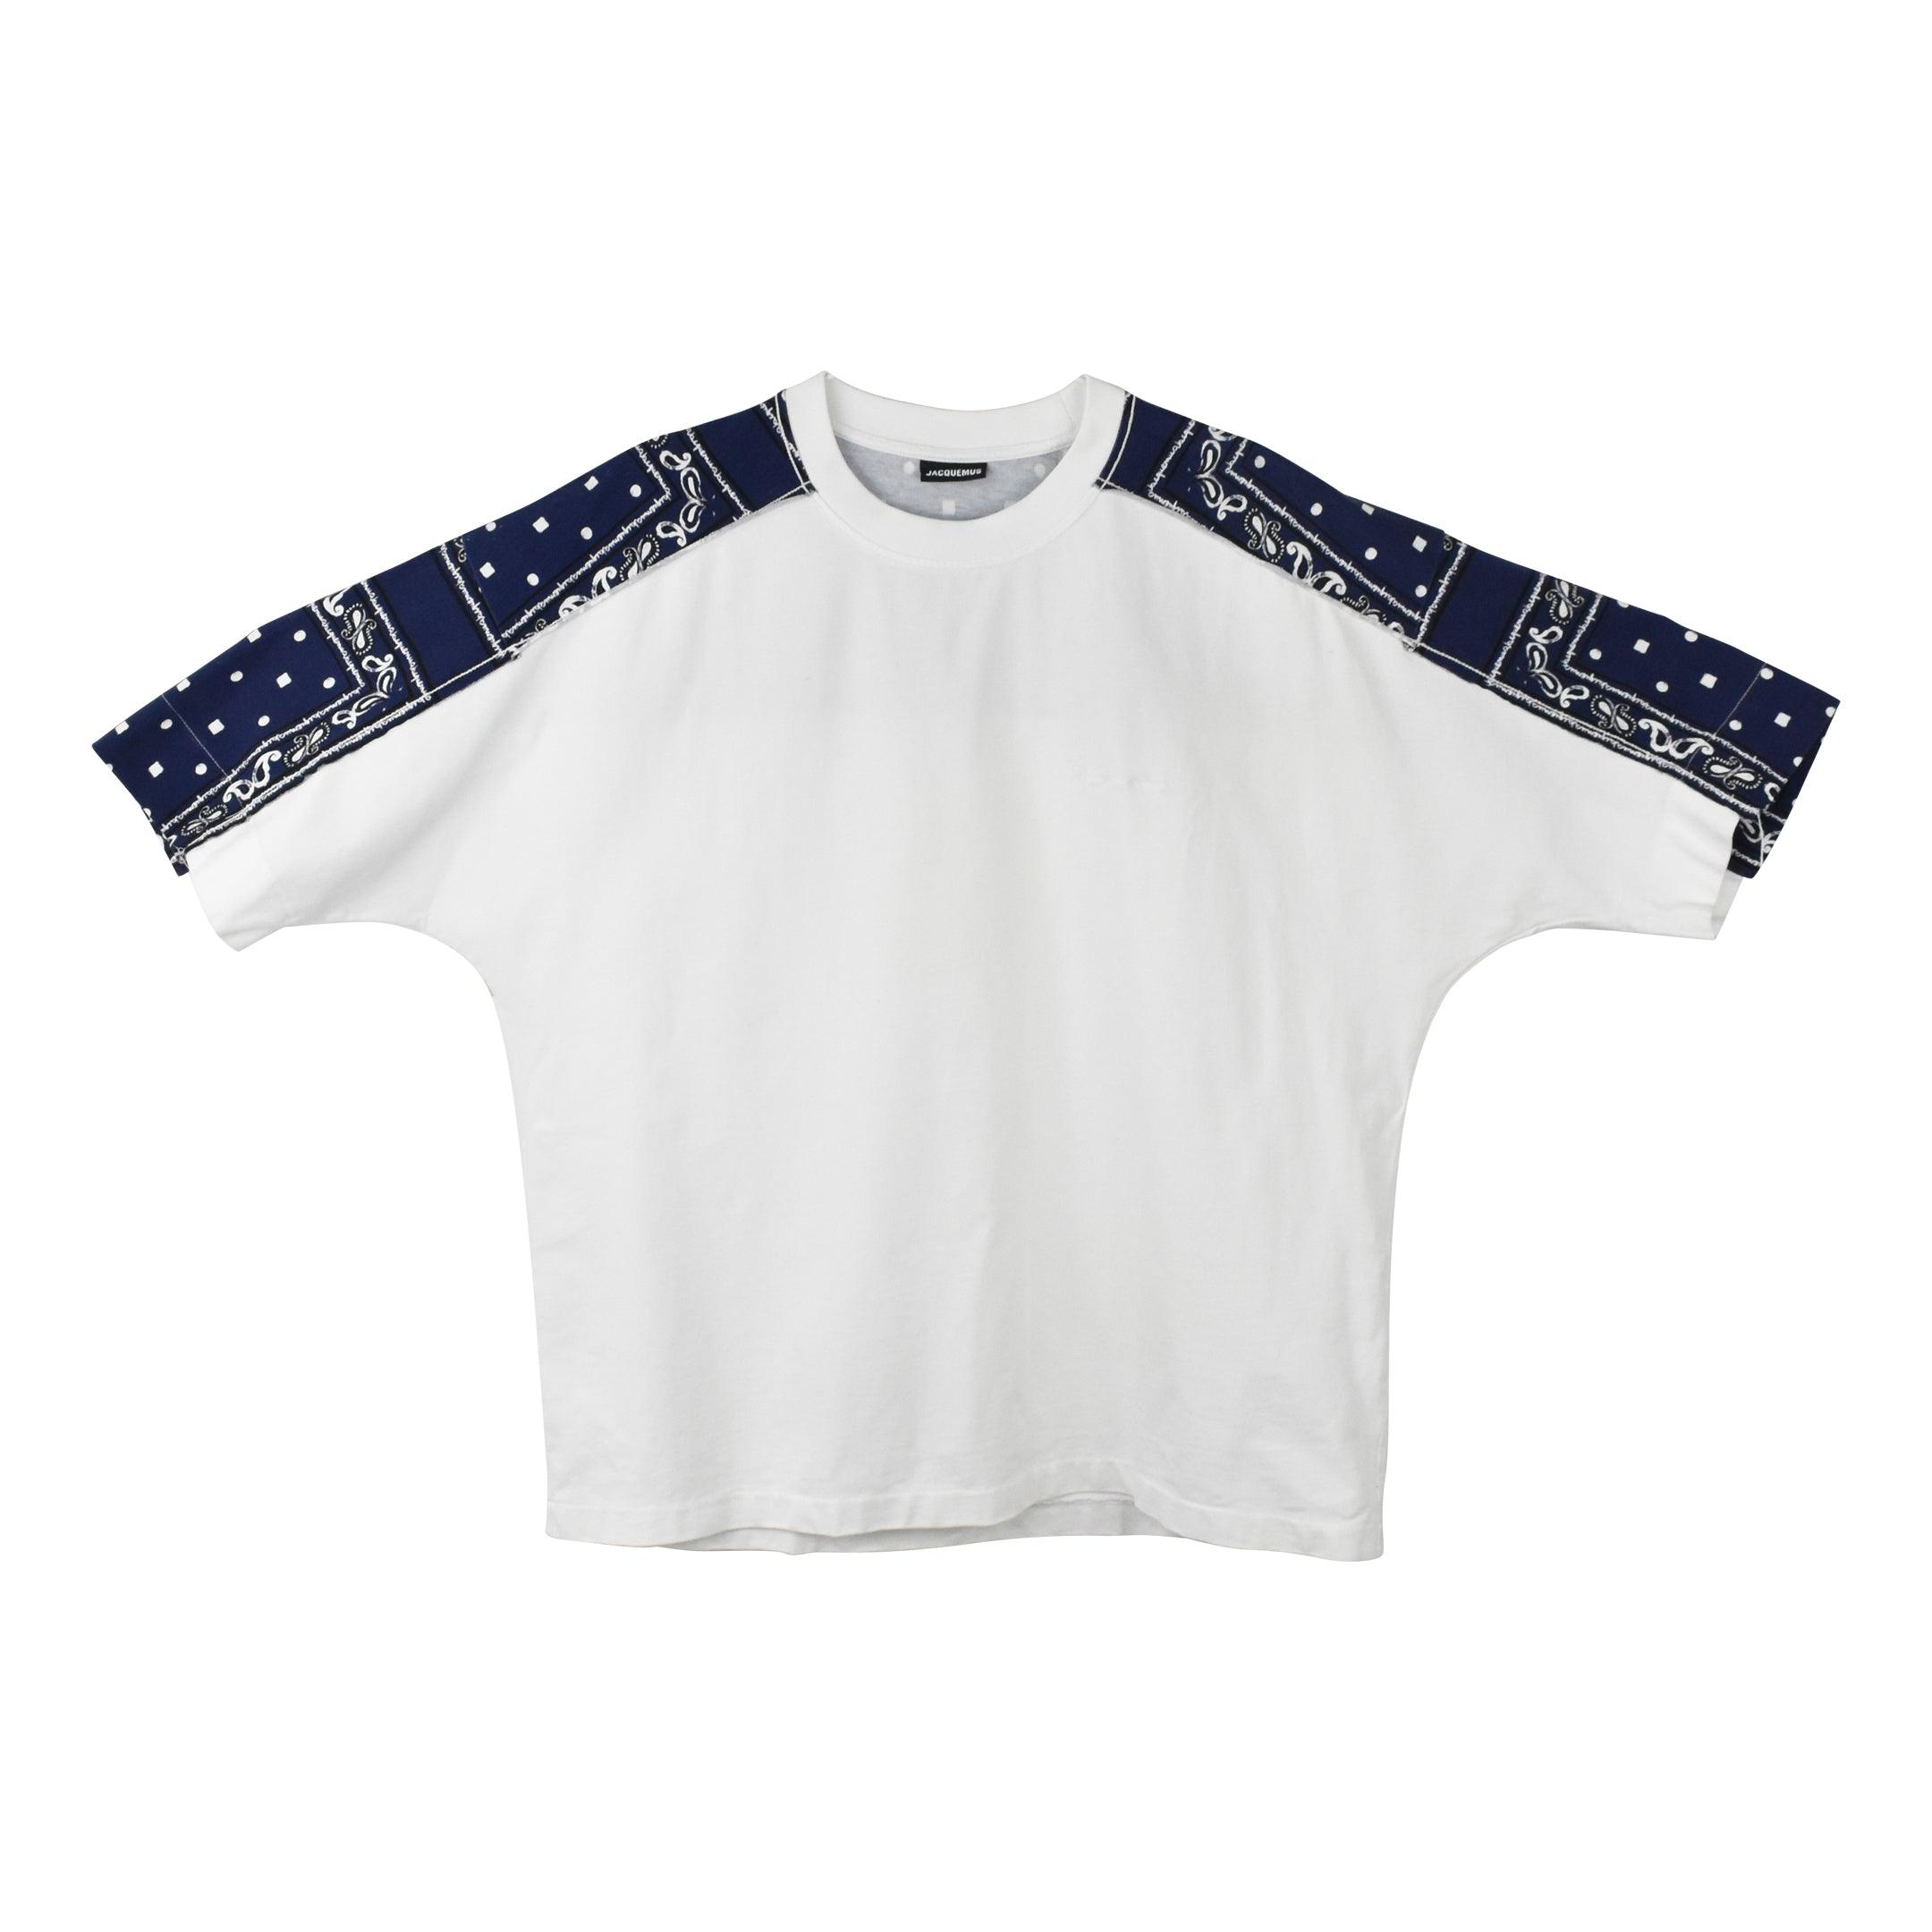 Jacquemus T-Shirt - Men's S - Fashionably Yours